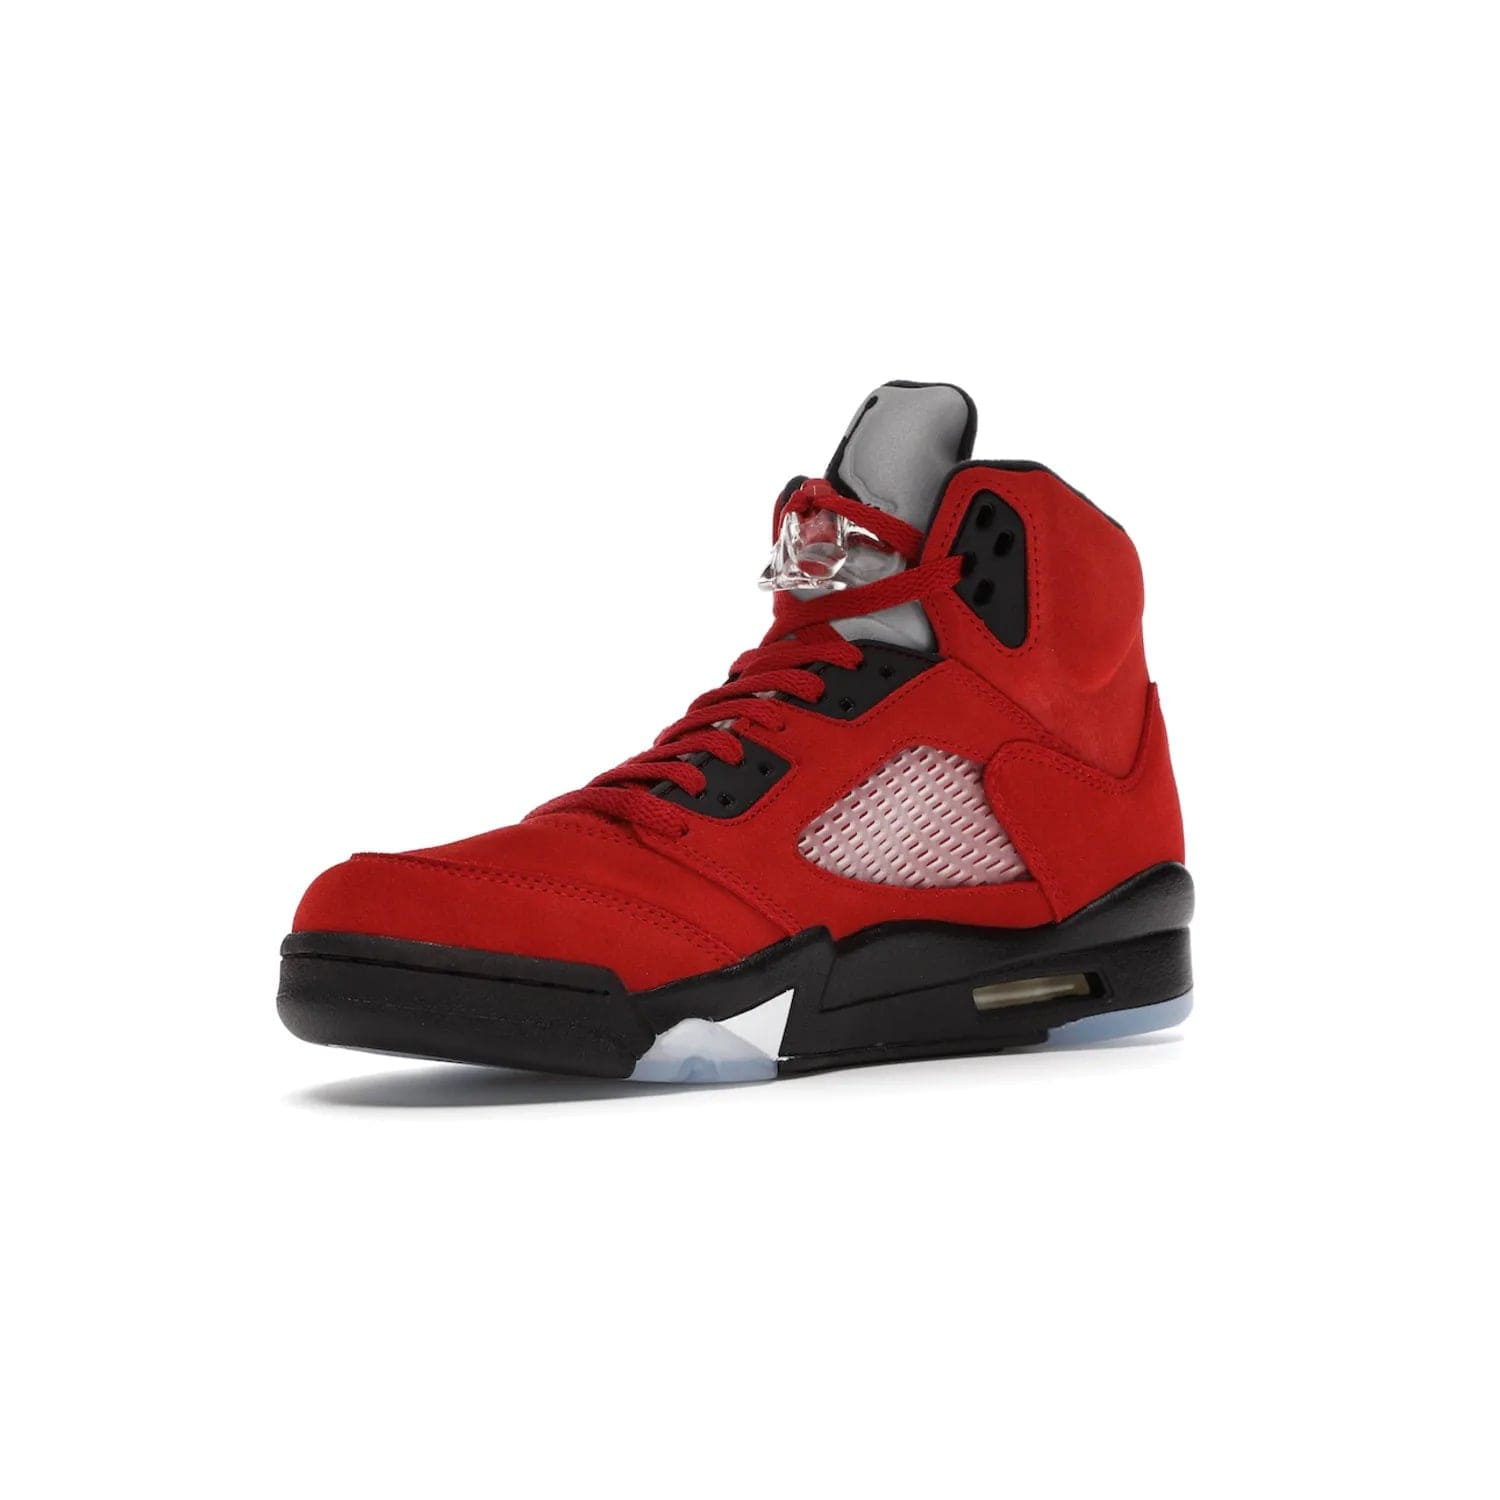 Jordan 5 Retro Raging Bull Red (2021) - Image 15 - Only at www.BallersClubKickz.com - Get ready for the 2021 stand-alone release of the Air Jordan 5 Raging Bulls! This all-suede upper combines luxe details like a Jumpman logo, red & black "23" embroidery and shark tooth detailing, atop a black midsole. Don't miss out - release date in April 2021 for $190.